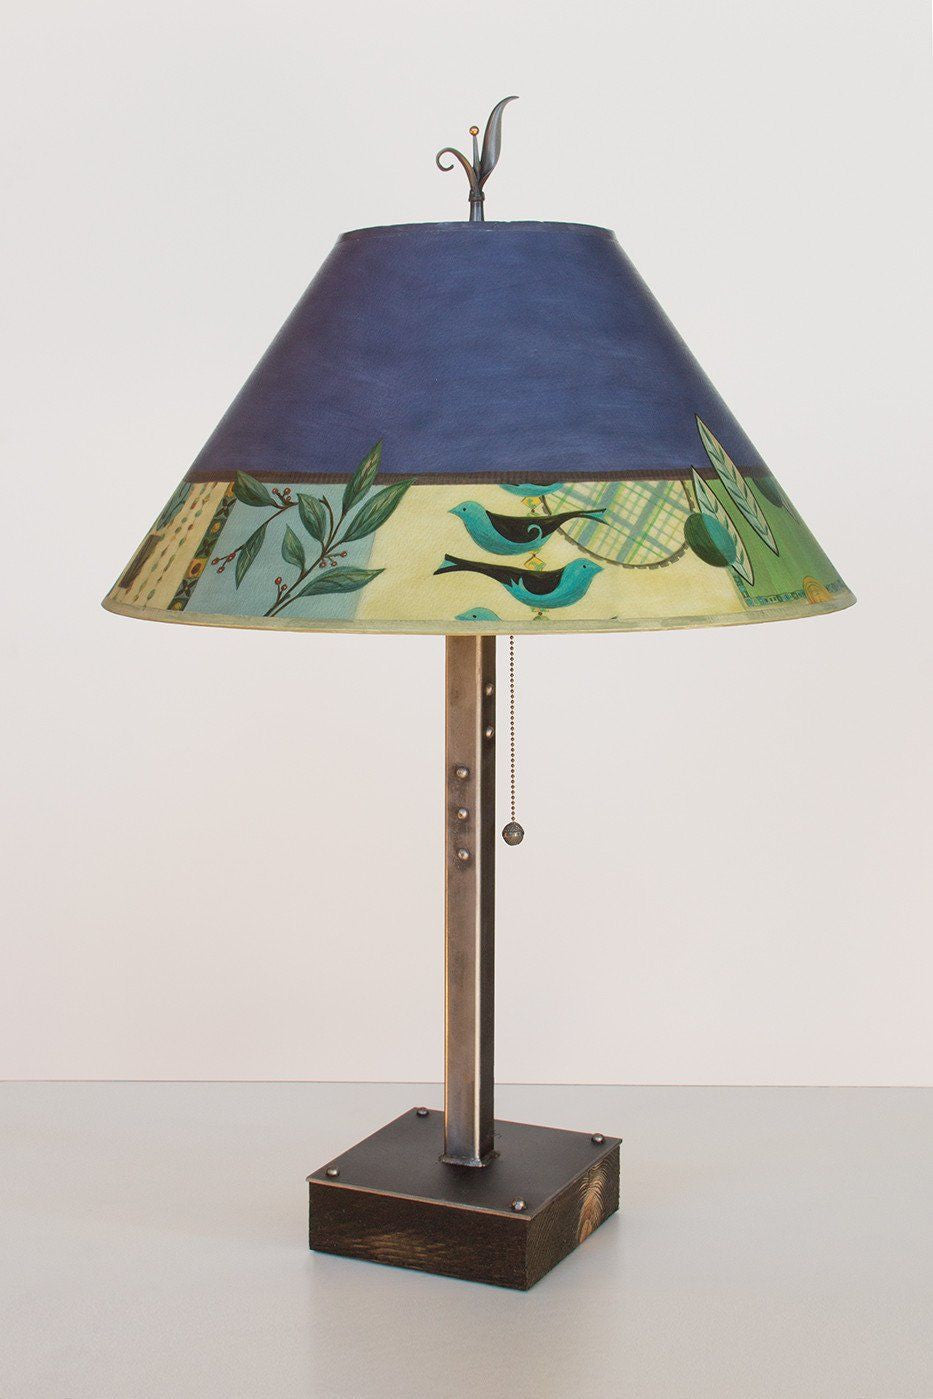 Janna Ugone & Co Table Lamps Steel Table Lamp on Wood with Large Conical Shade in New Capri Periwinkle